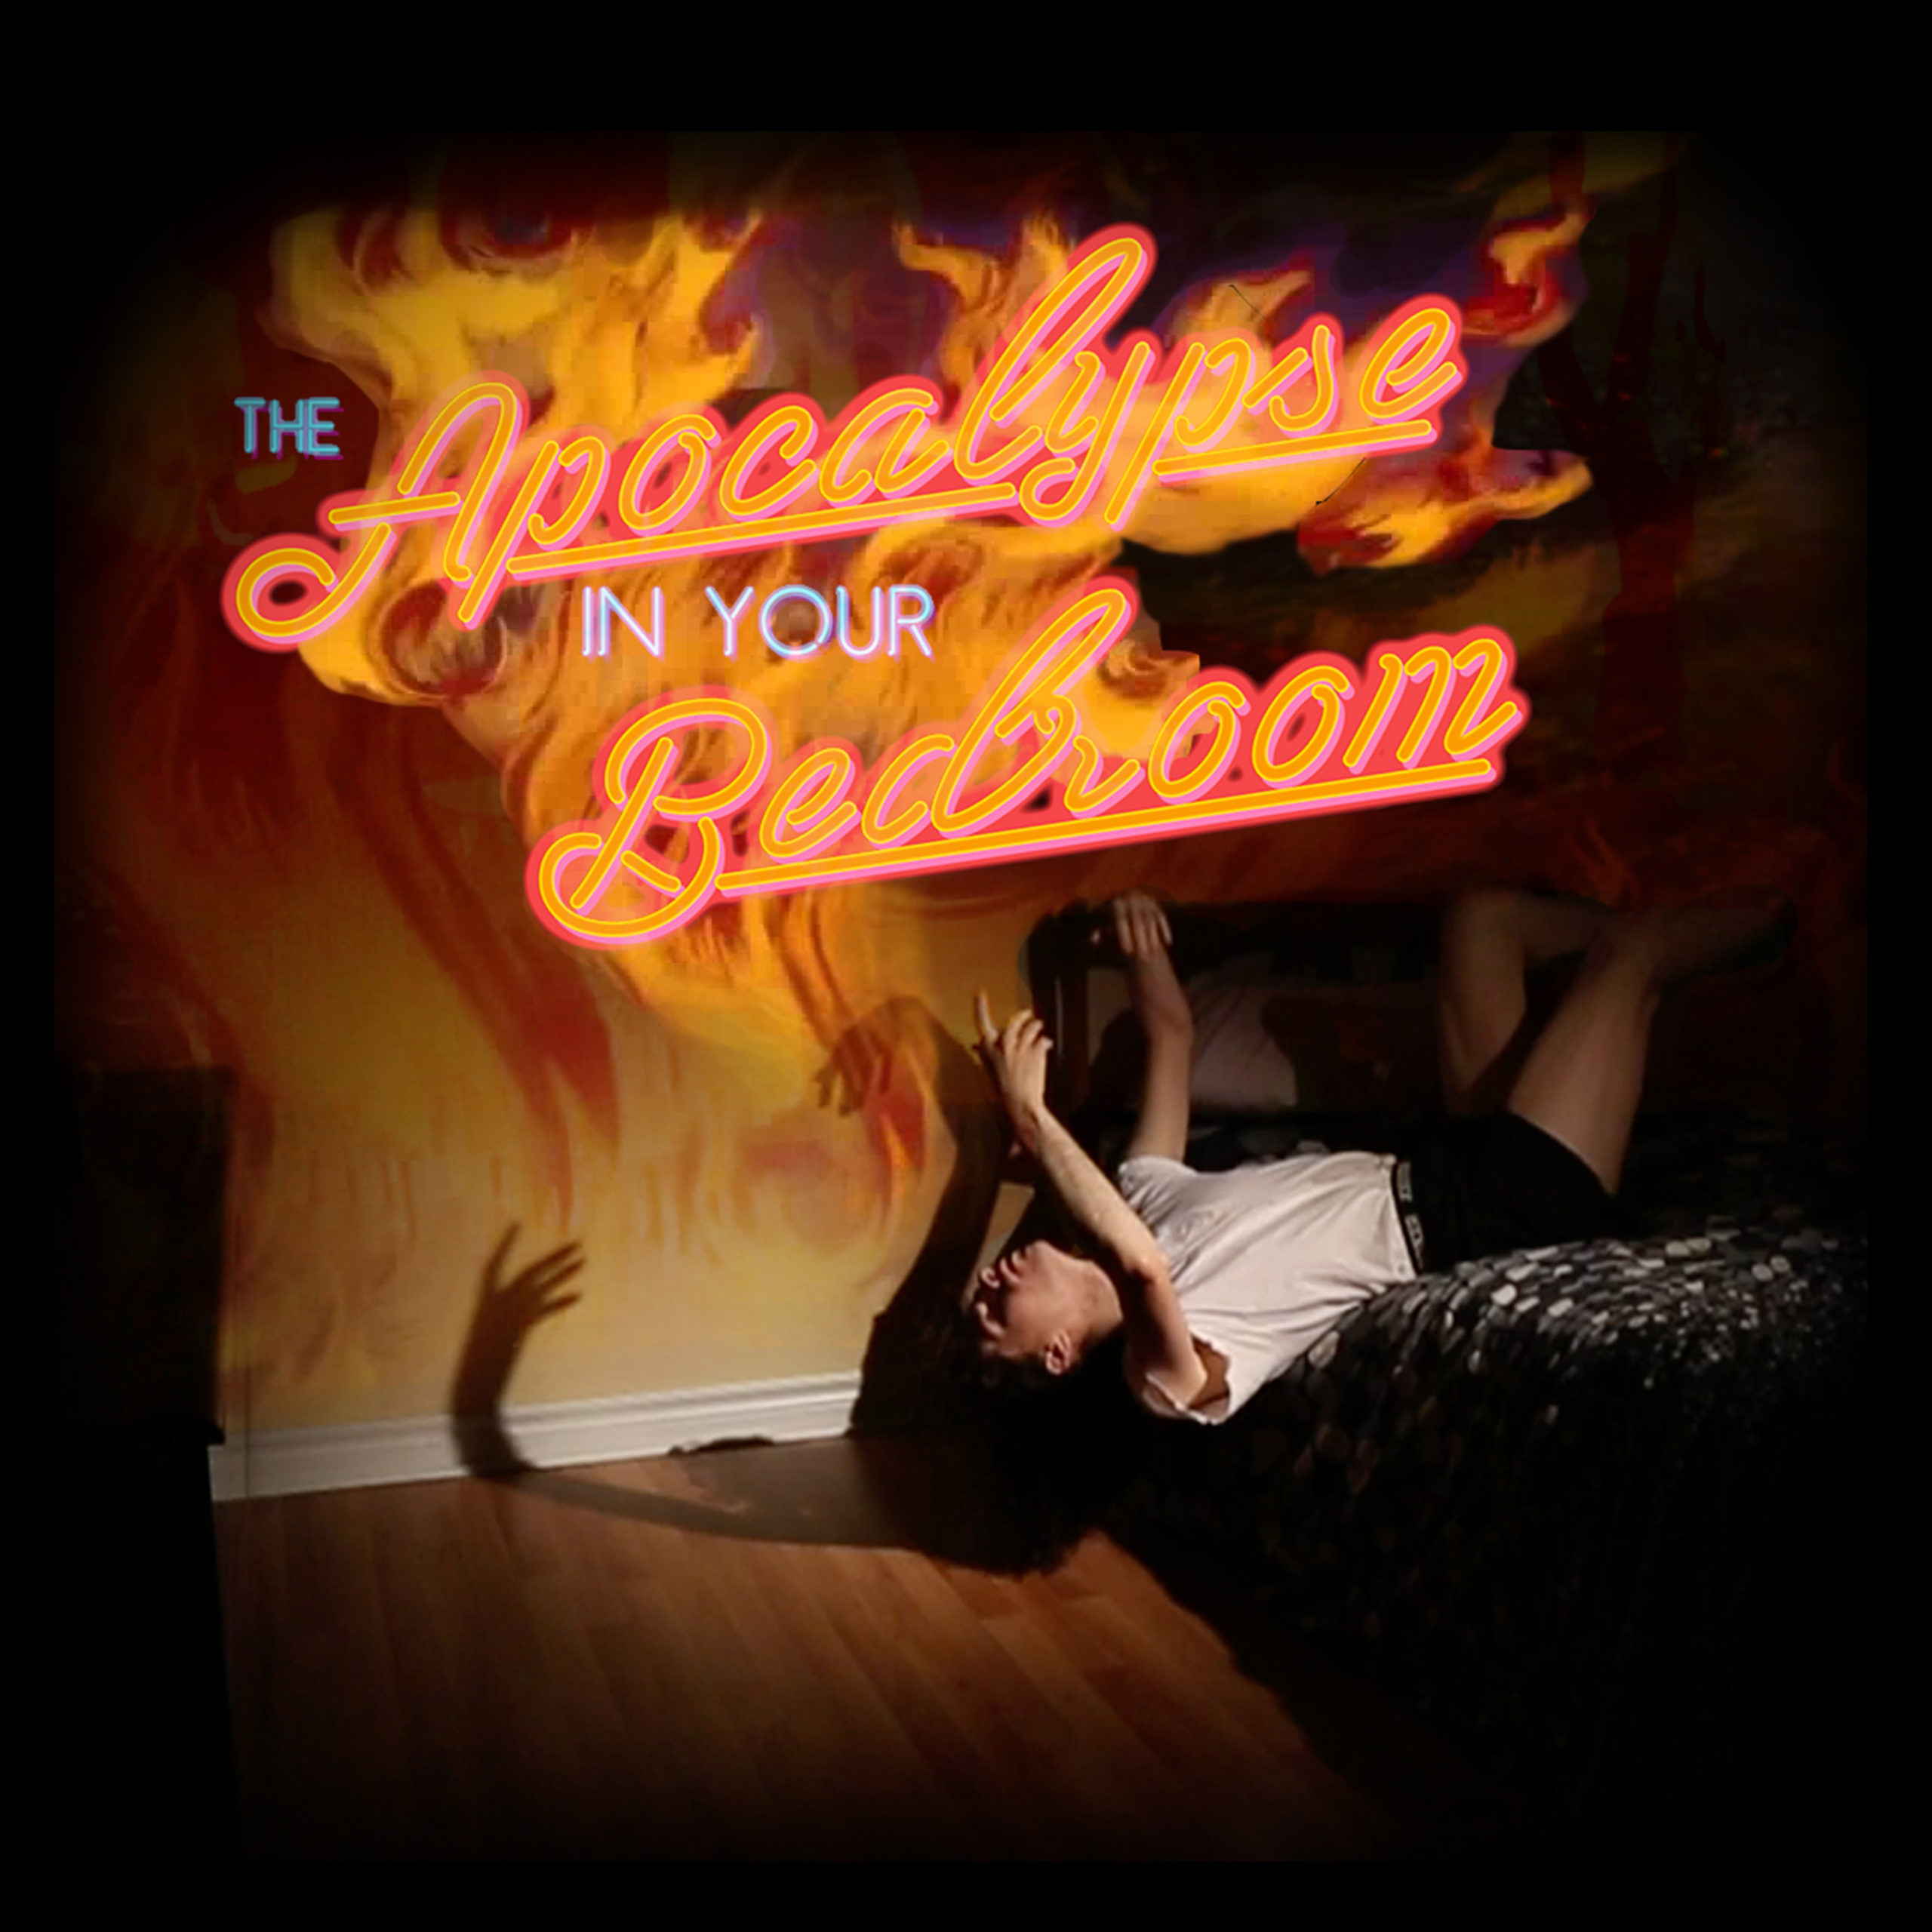 A photo collage depicting a person, positioned on their back, hanging off the bed in a darkened room. One of their hands points to flaming words “the Apocalypse in Your Bedroom” above them.